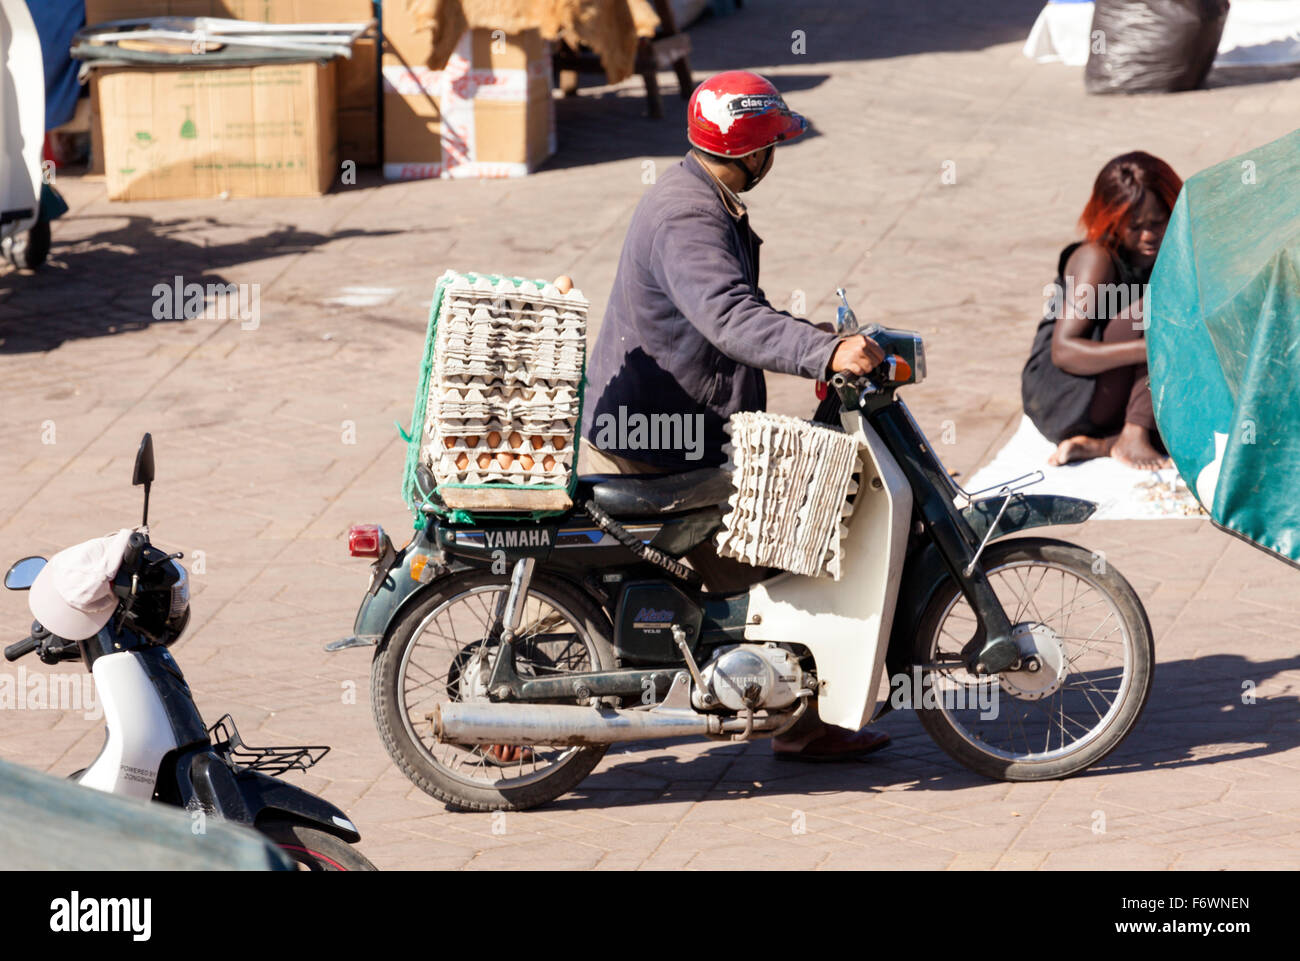 Egg supplier with motor scooter, Djemaa el Fna square, Marrakesh, Morocco Stock Photo